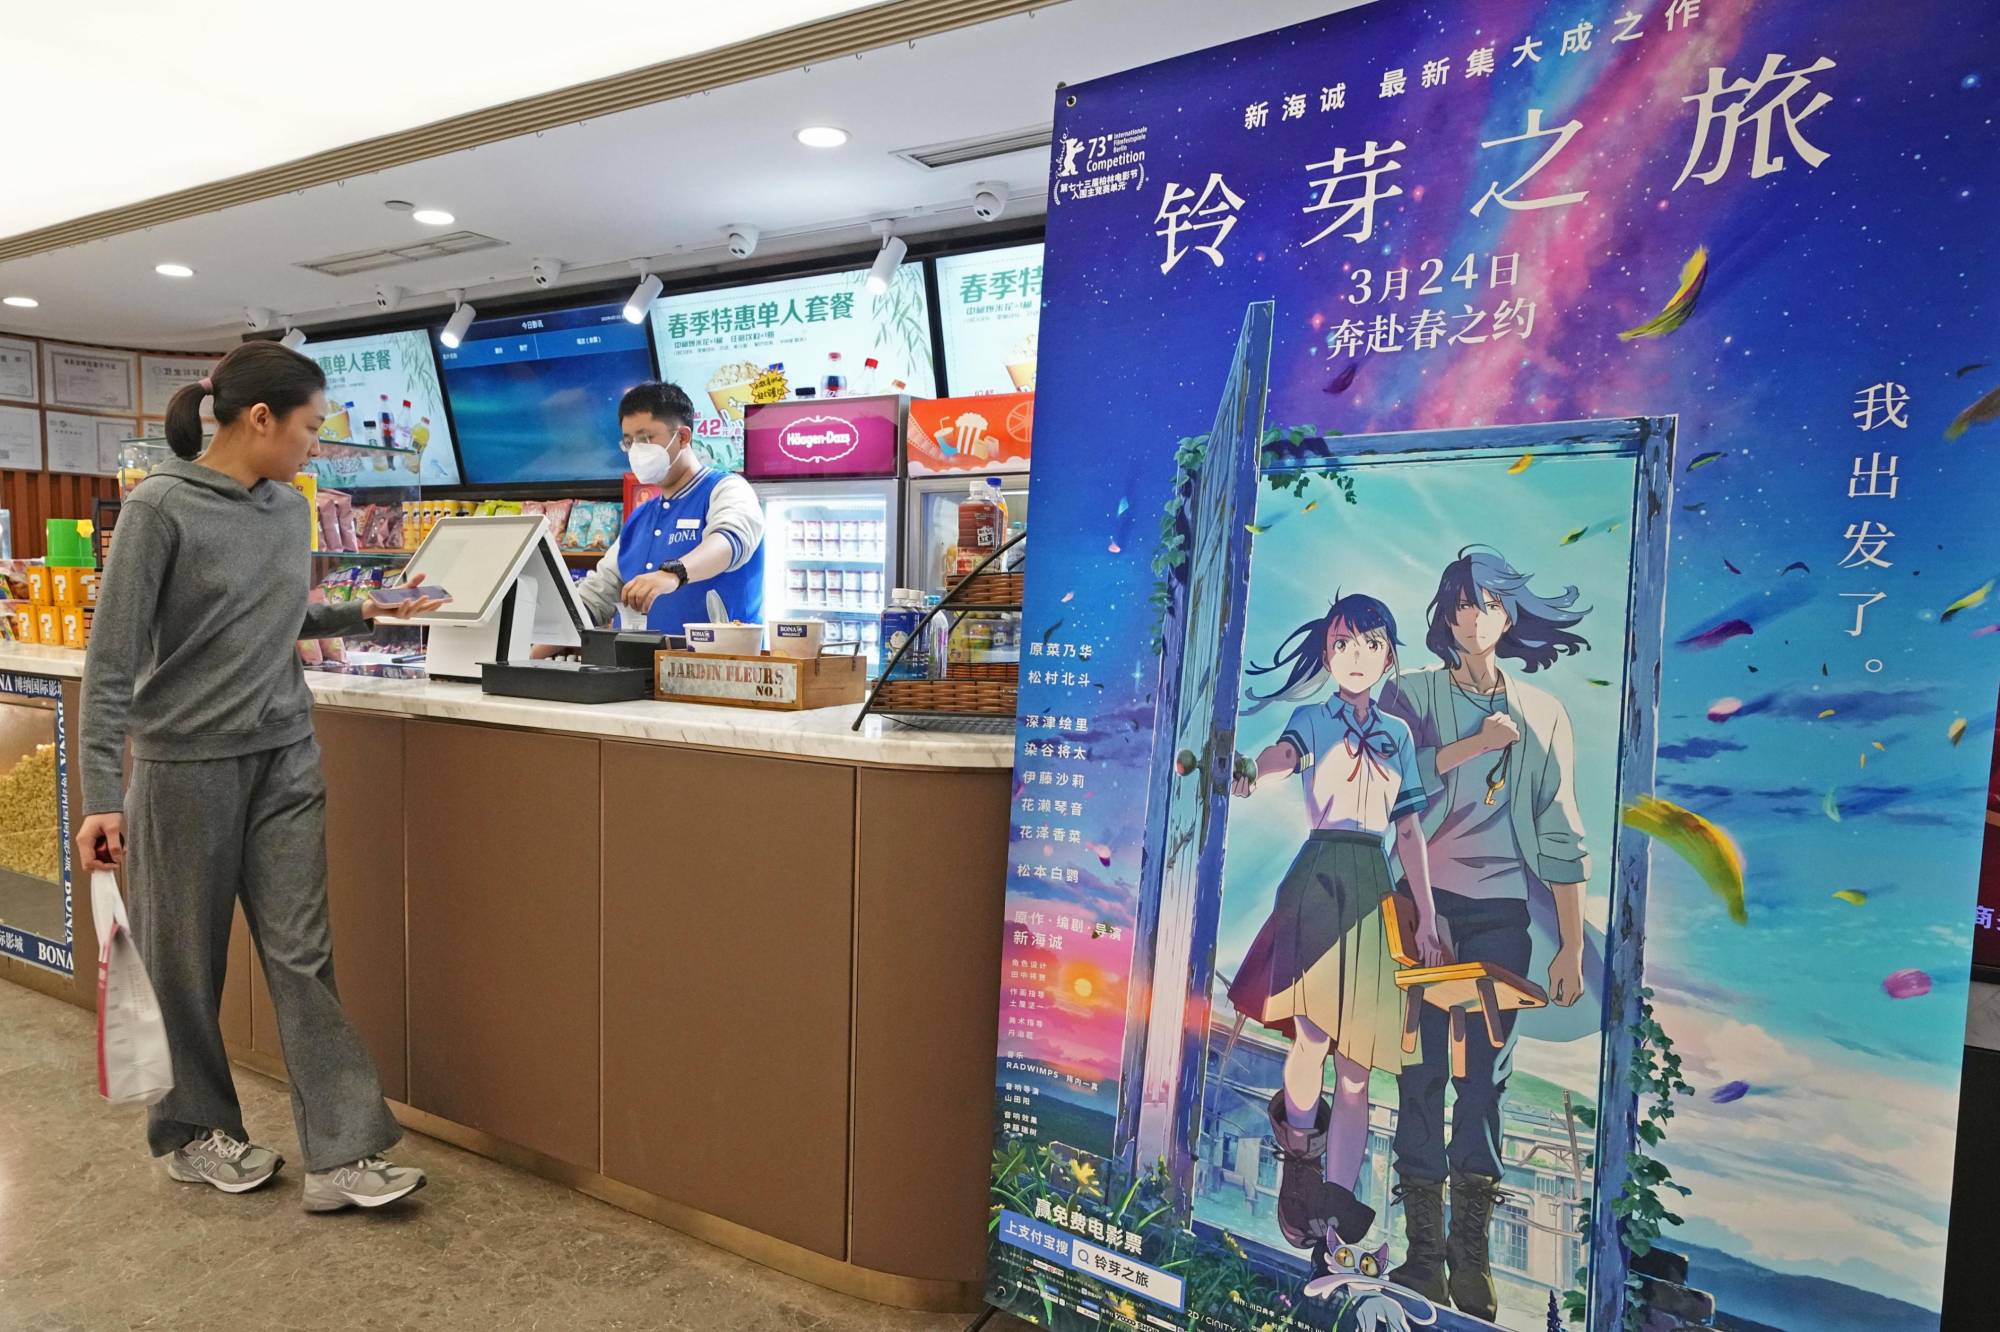 Animation <em>Suzume </em> leads China's box office - chinaculture.org